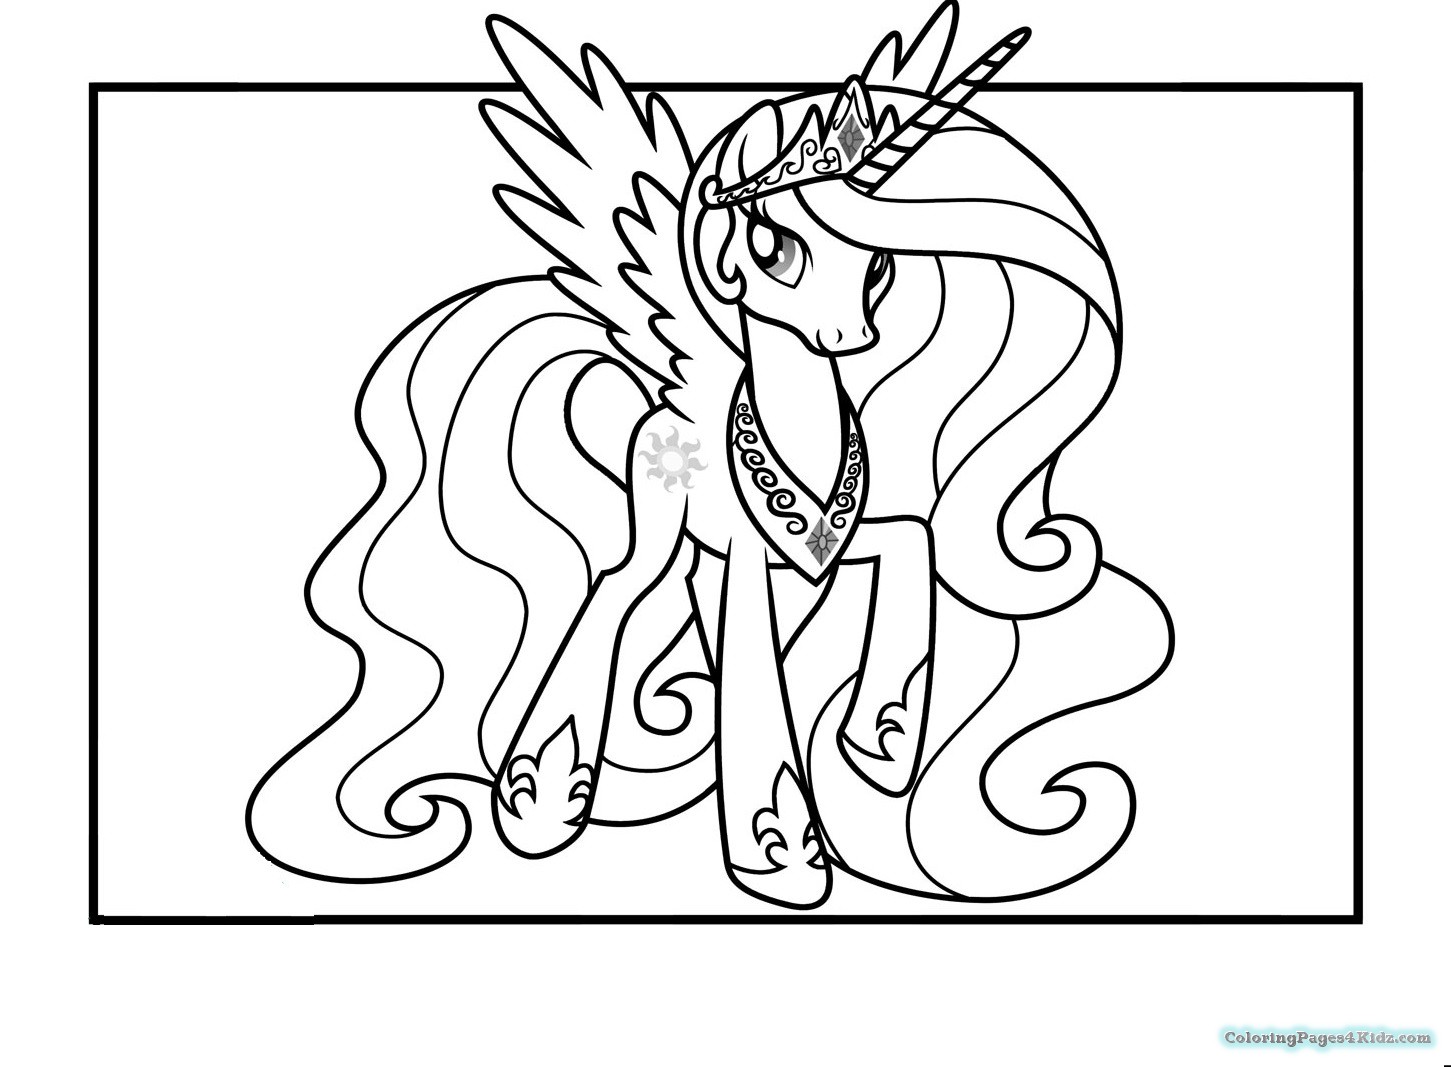 Princess Celestia Coloring Pages at GetColorings.com | Free printable